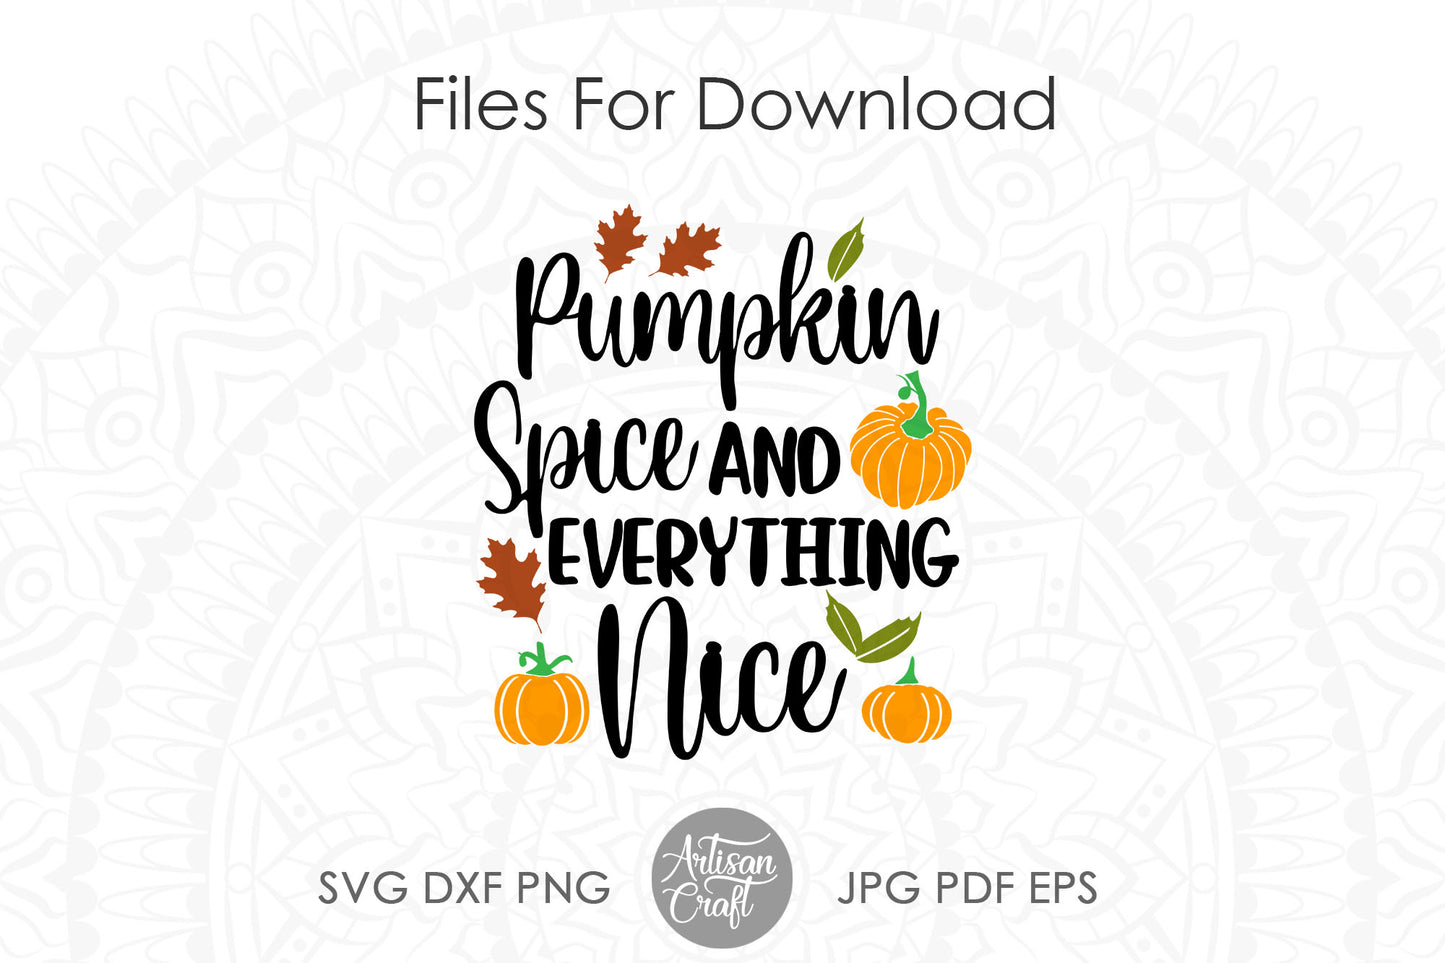 Pumpkin spice and everything nice SVG